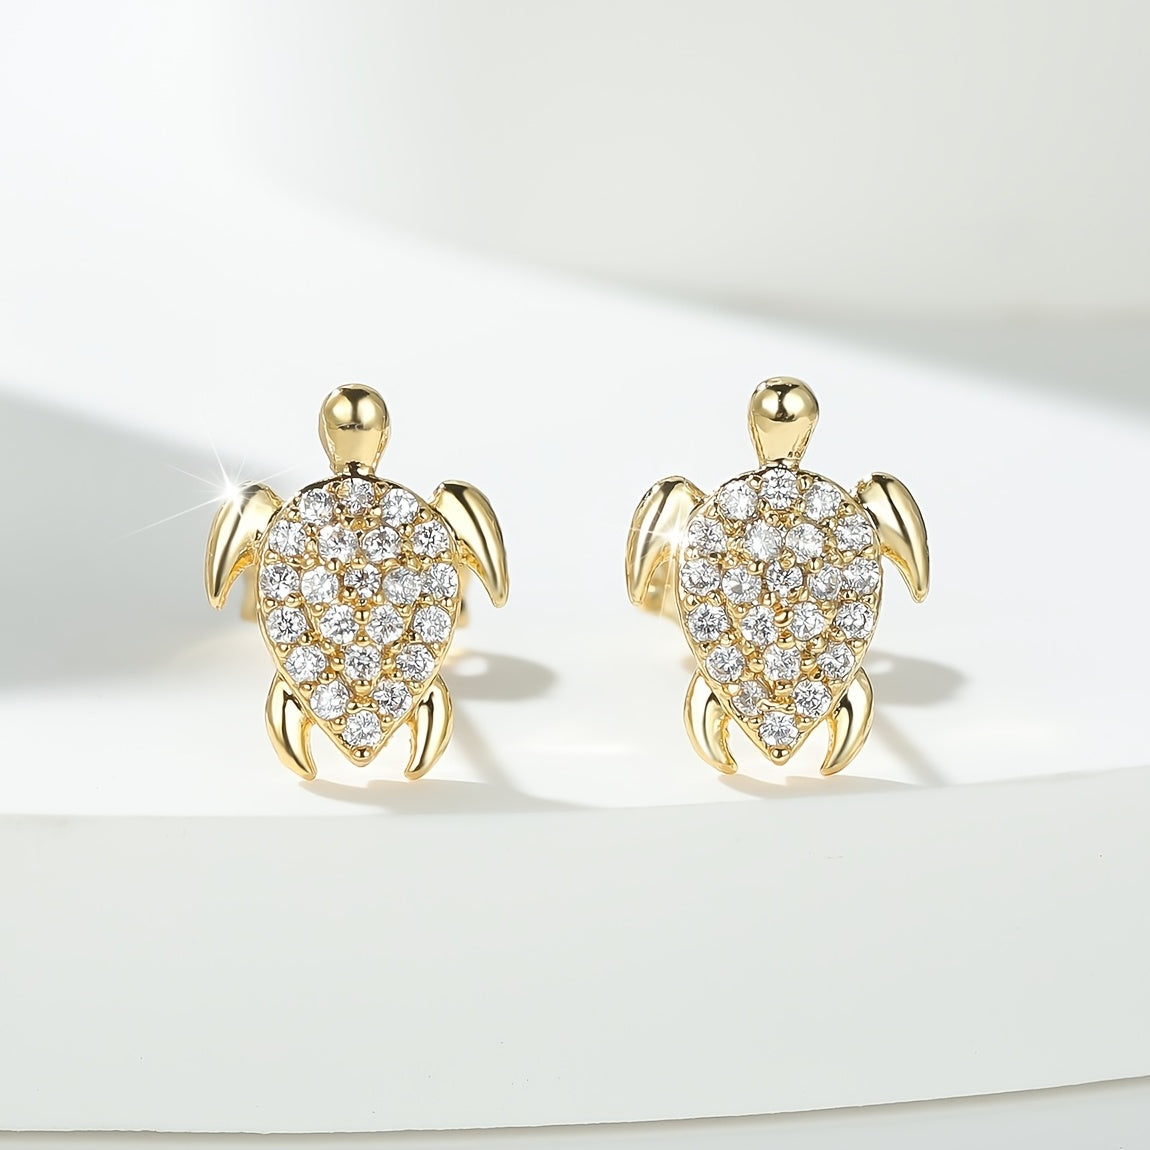 Gorgeous Sea Turtle Earrings - White Crystal Studs with Vintage Gold Plating - Perfect for Weddings or Everyday Wear!